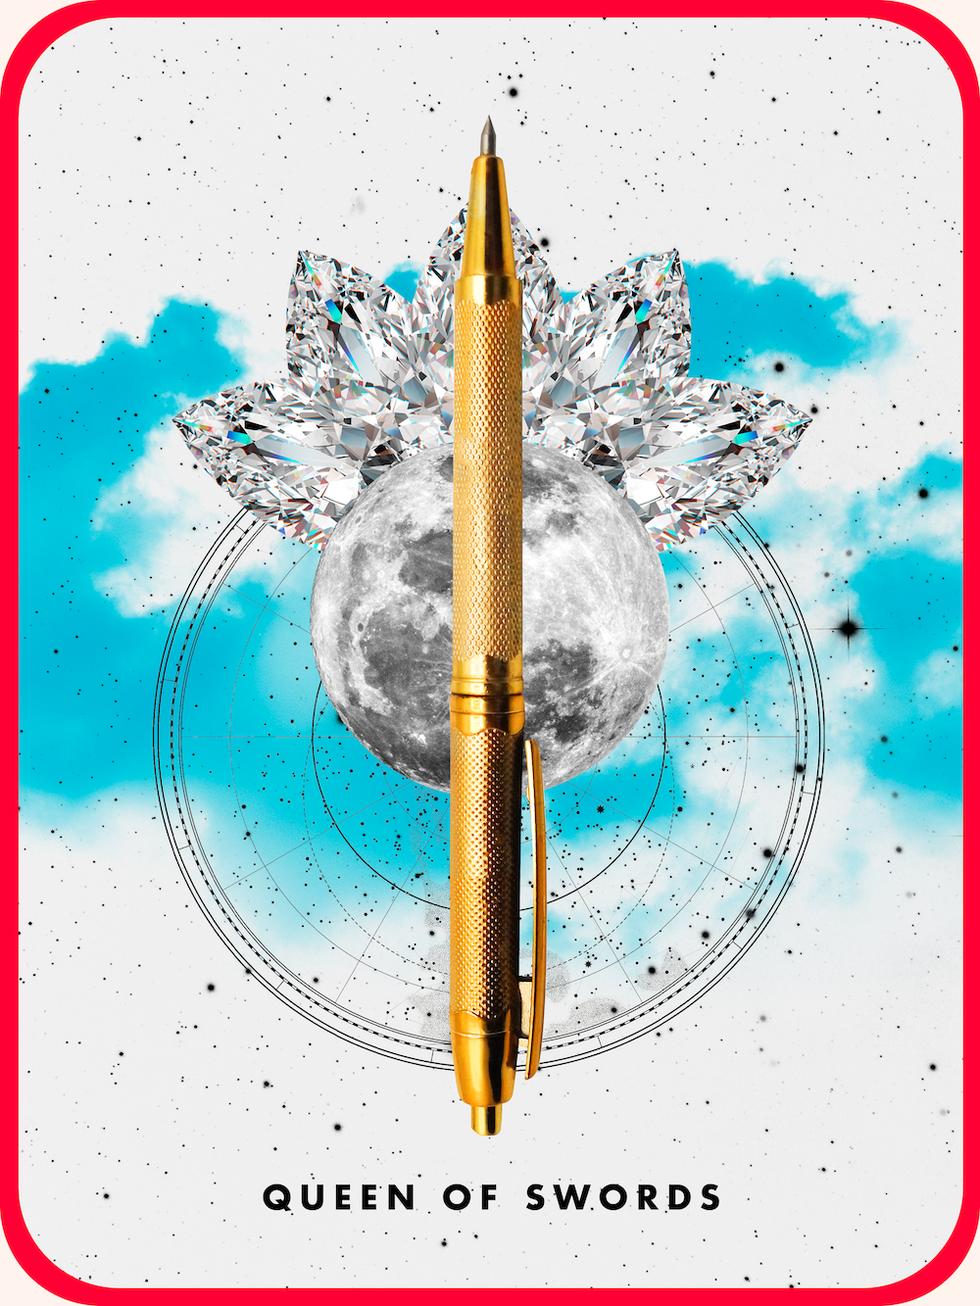 the queen of swords tarot card, showing a golden pen in front of a full moon and a crown shaped diamond